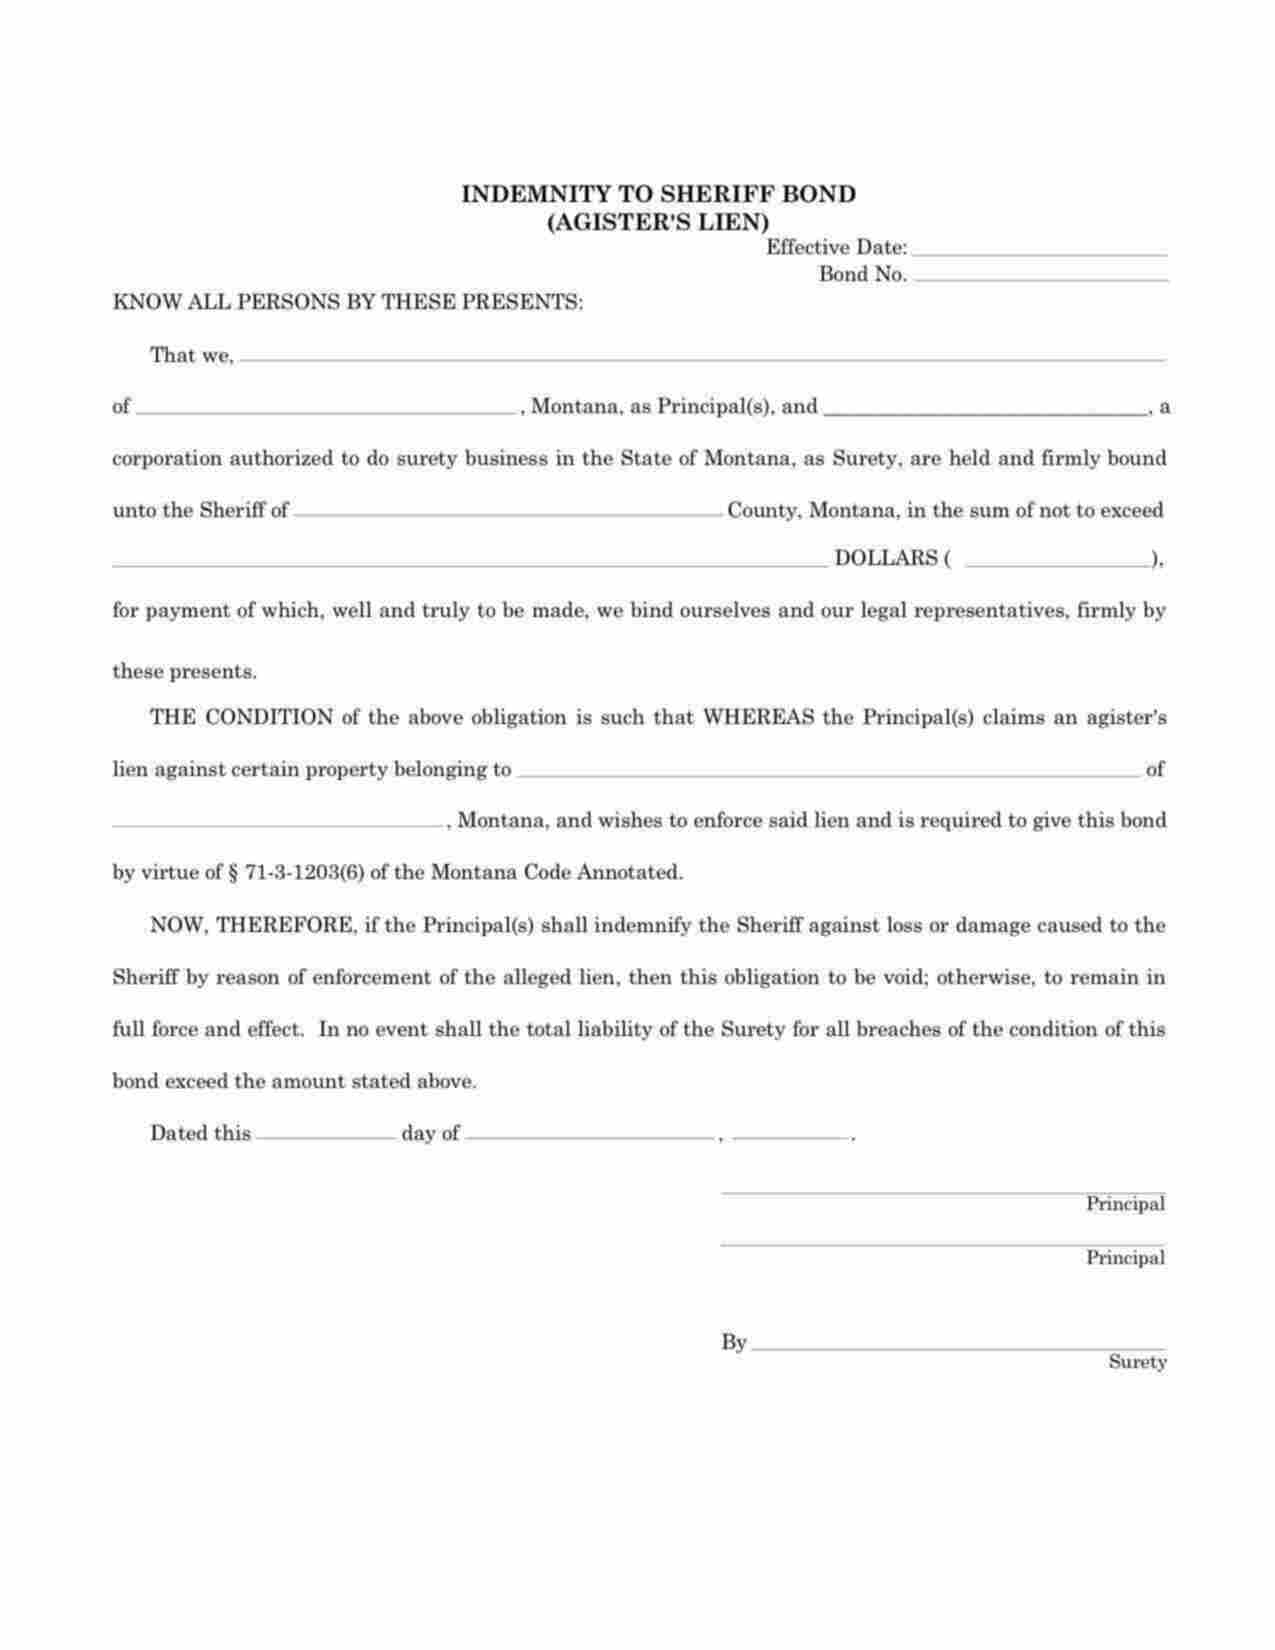 Montana Indemnity to Sheriff - Agister's Lien Bond Form